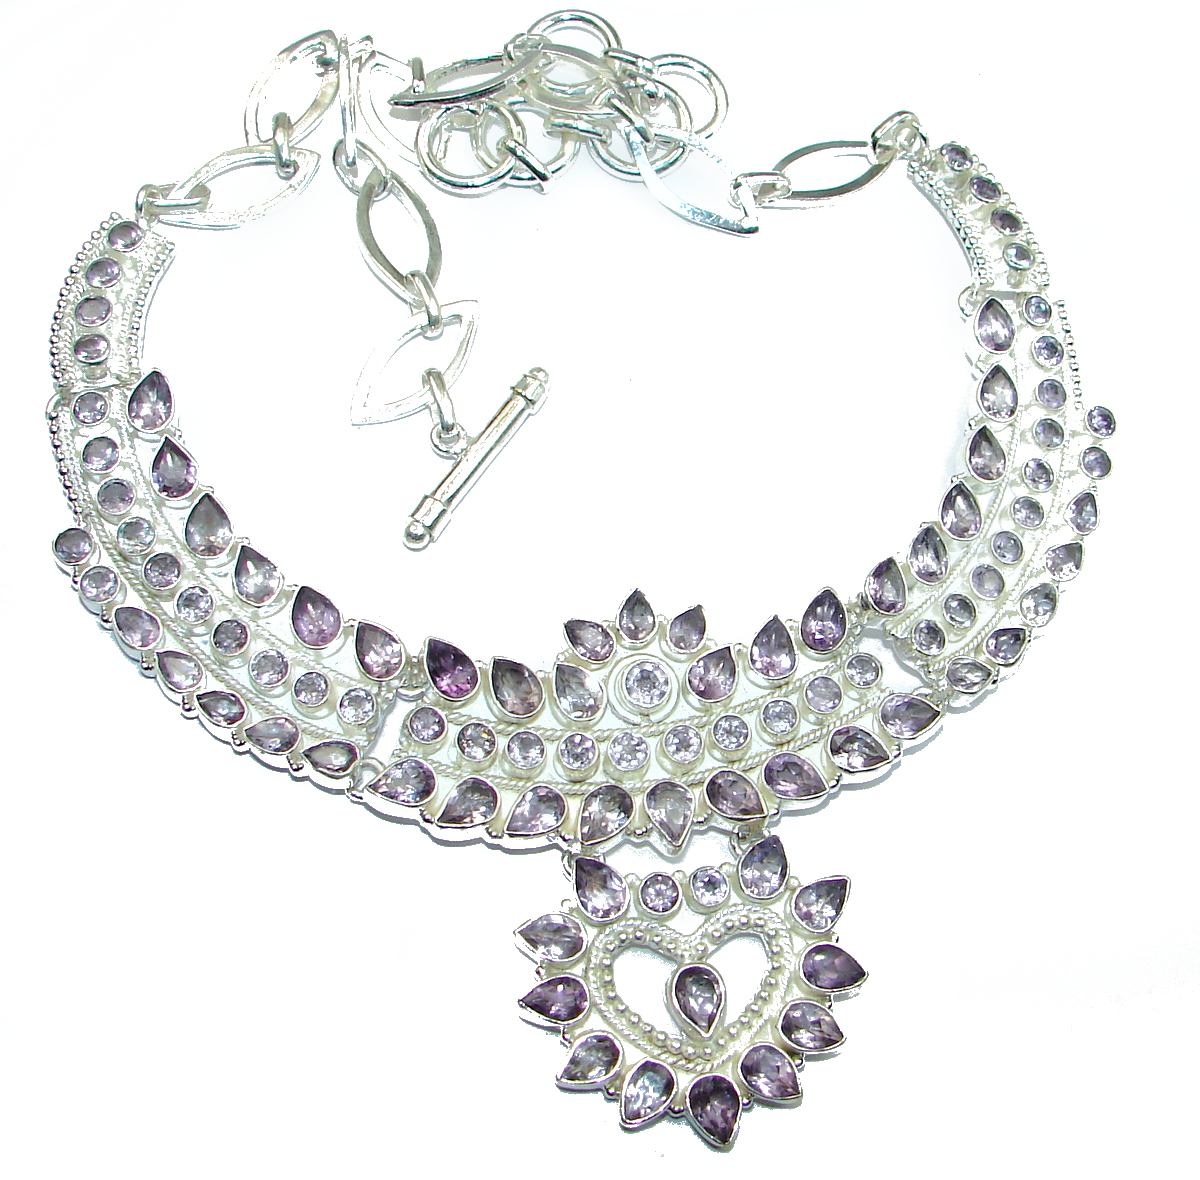 Handmade Artisan Sterling Silver 925 Necklace with unique one of a kind Amethyst,  78.55 grams of marvelous handcrafted jewelry design. Only one piece availble ready to ship! It's unique worldwide necklace - simply piece of art in world of fine jewelry. Great genuine  Amethyst .925 Sterling Silver handmade Necklace  NECKLACE DETAILS: Weight: 78.55g; Material: Sterling Silver; Main stone: Amethyst; Inner circumference: 16 inch; Drop Part: 2 1/2 inch; Clasp: toggle; Stamp / Mark: 925; Condition: New; Main color: purple; Shape: abstract; Collection: Agra;  Item Code: 8-lis-18-38